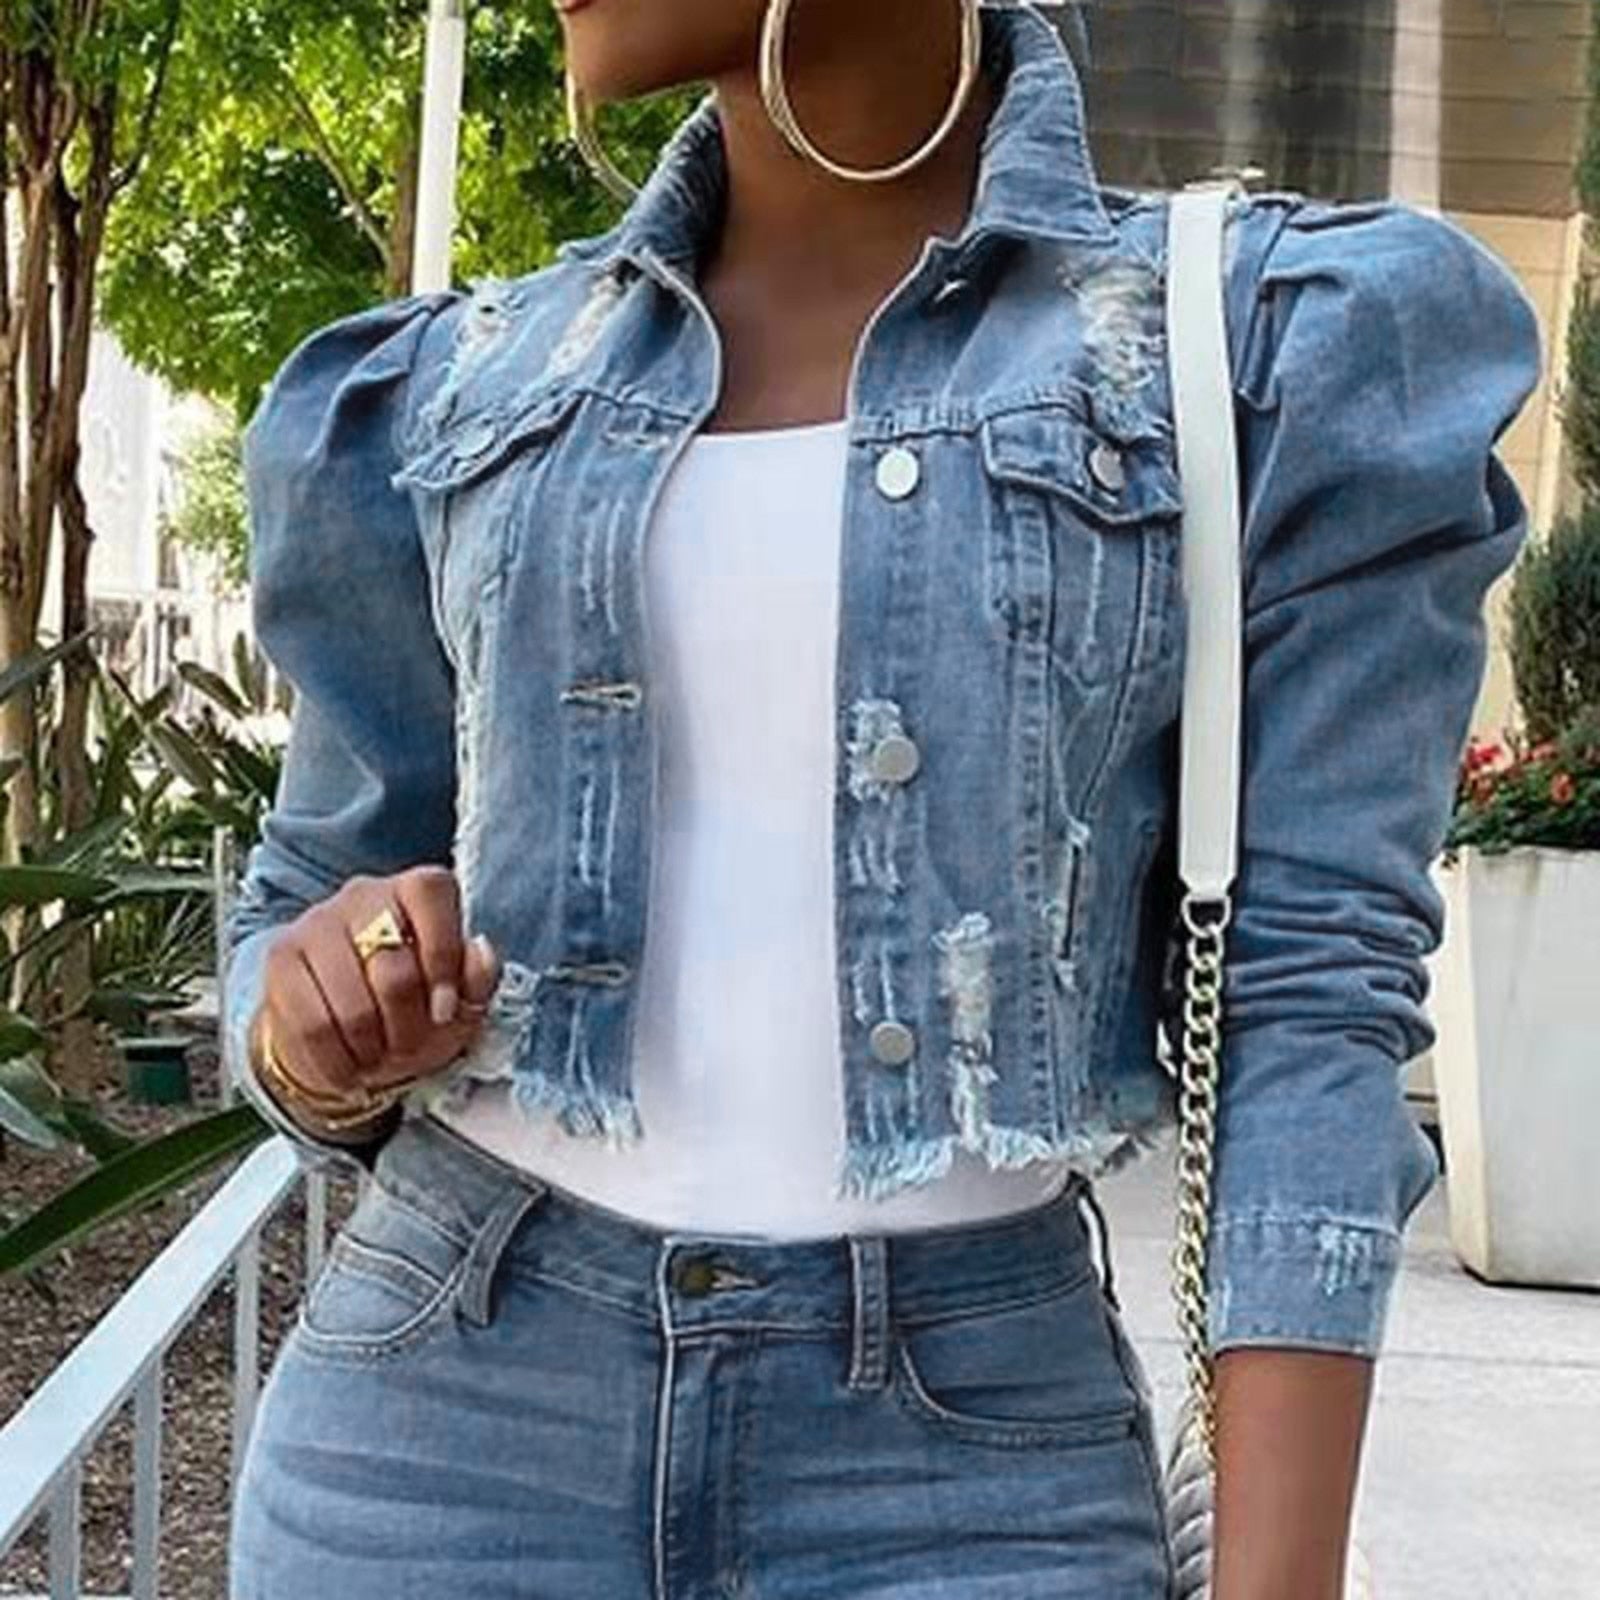 Billlnai Womne's Vintage Retro Hand-Washed Denim Coats Ladies Slim Long Sleeved Ripped Jeans Jackets High Street Single Breasted Tops